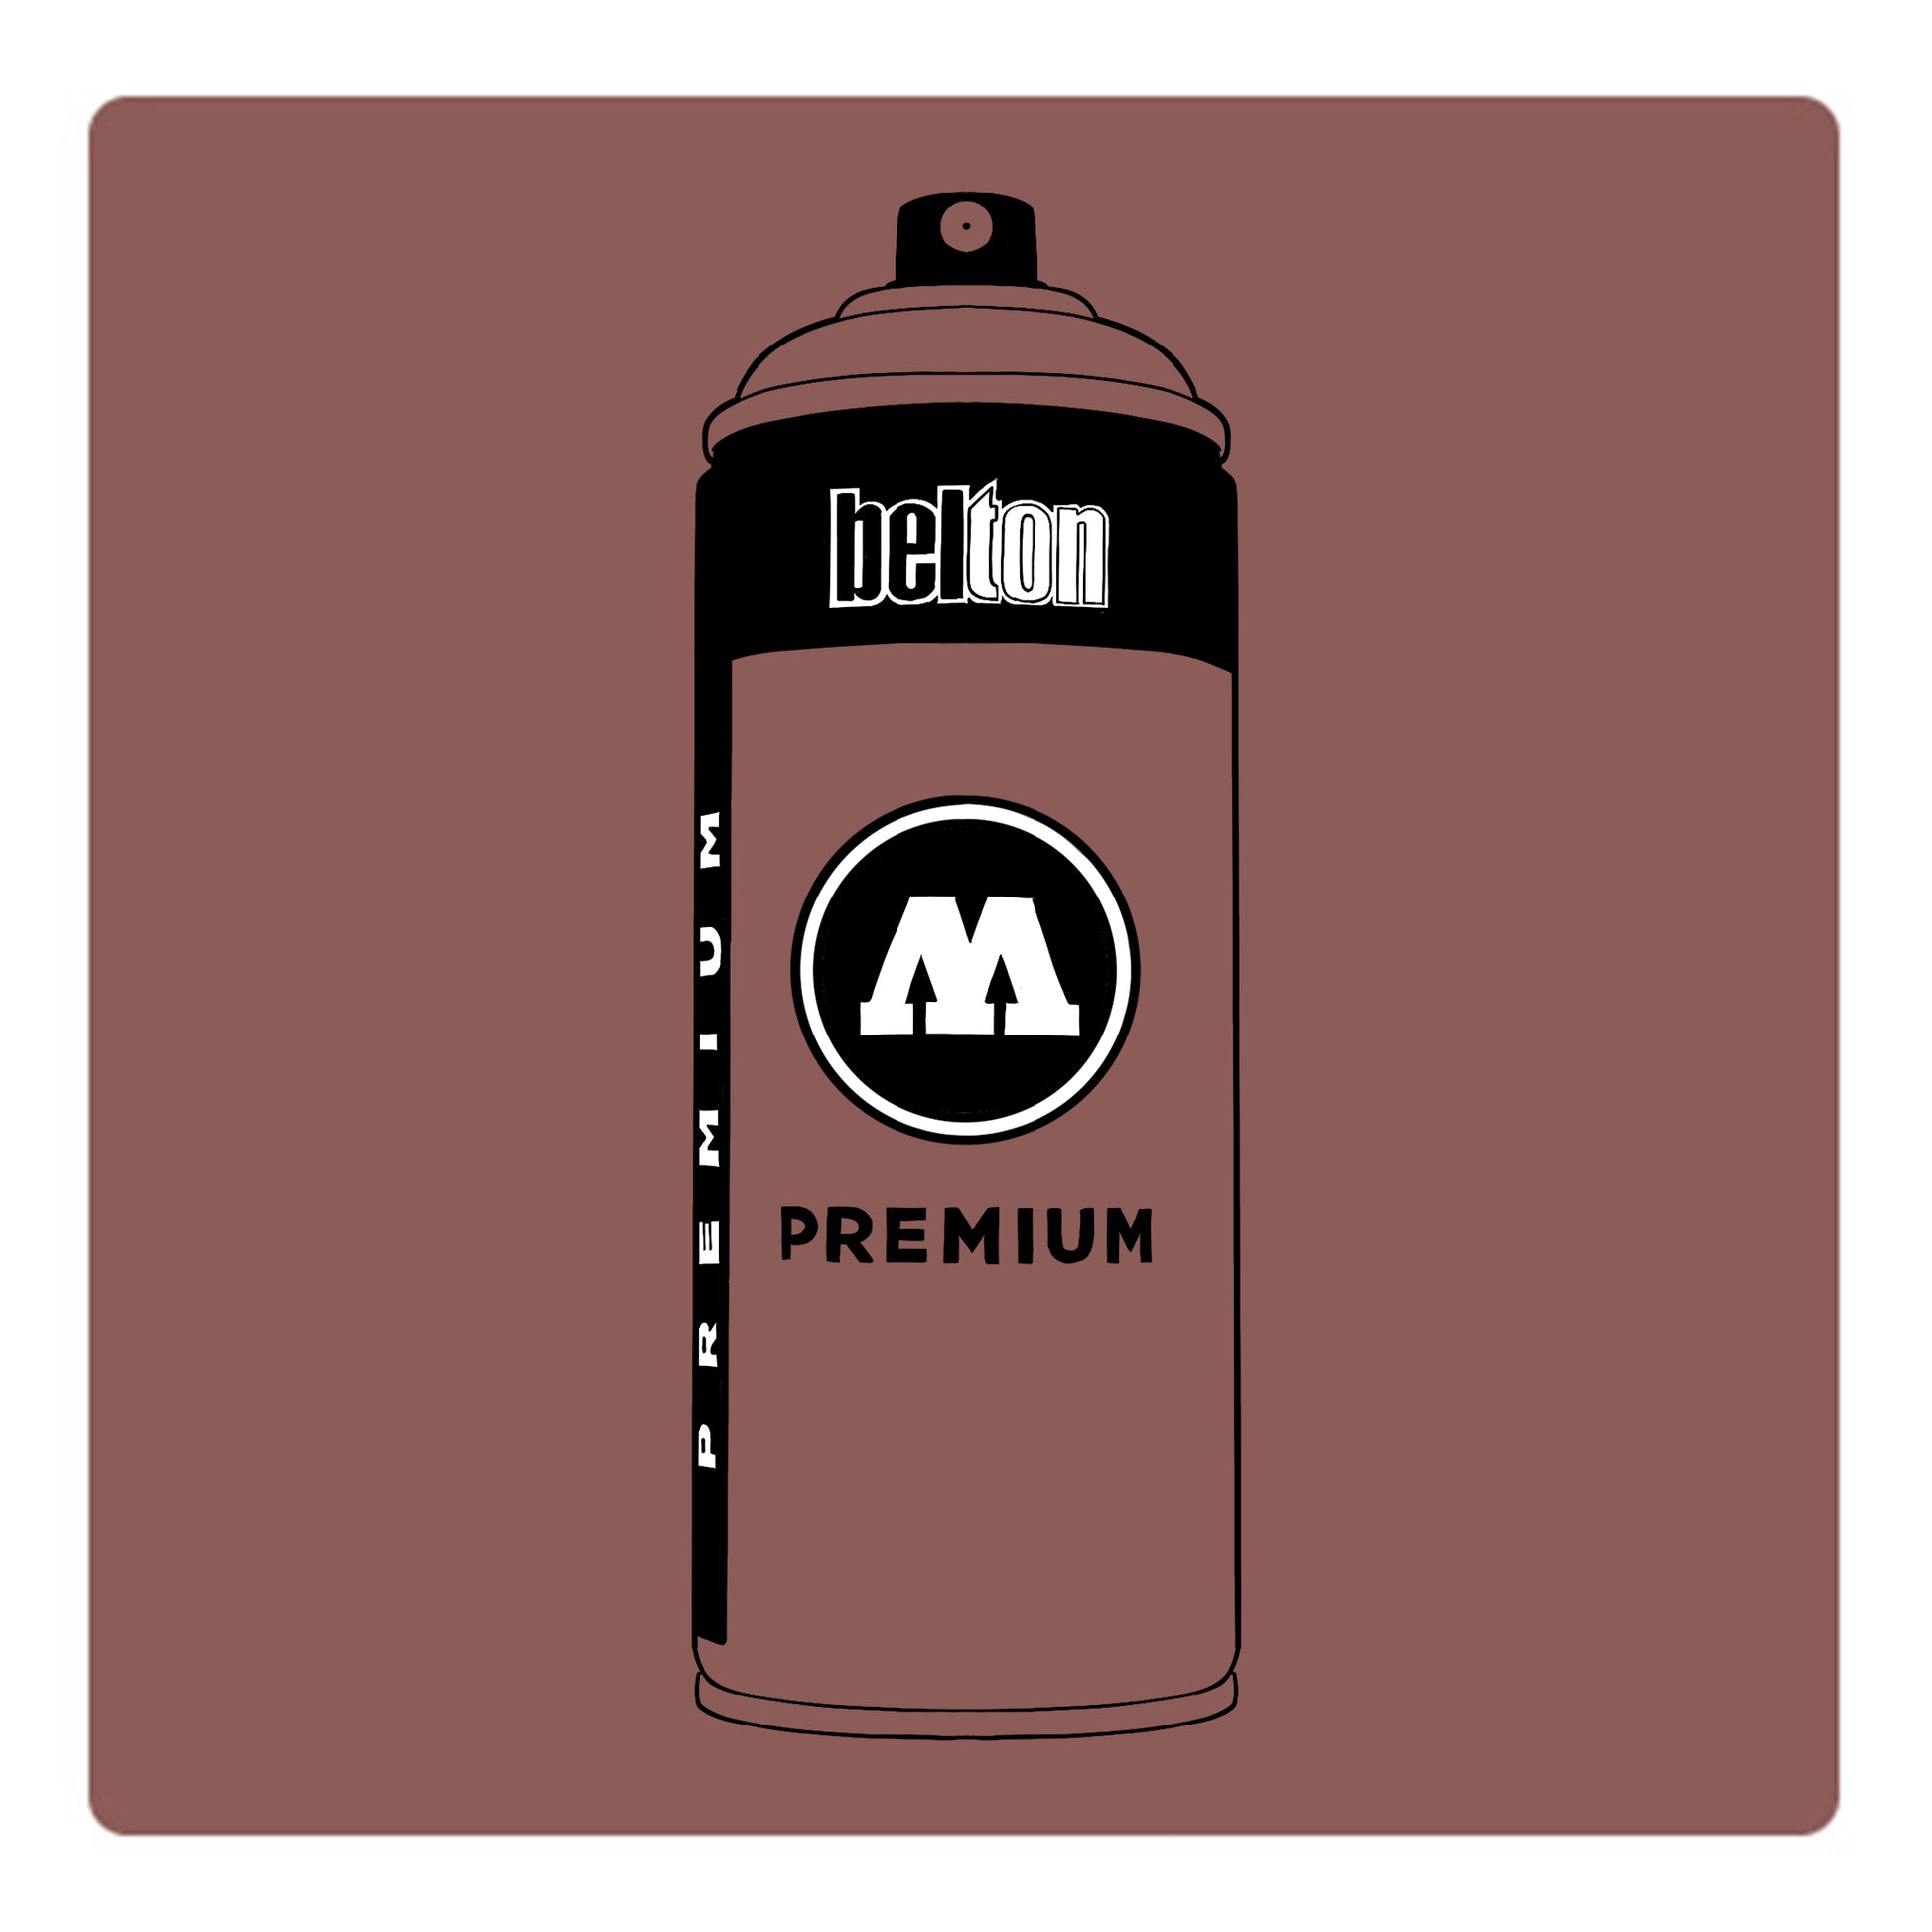 A black outline drawing of a  dark mauve pink spray paint can with the words "belton","premium" and the letter"M" written on the face in black and white font. The background is a color swatch of the same dark mauve pink with a white border